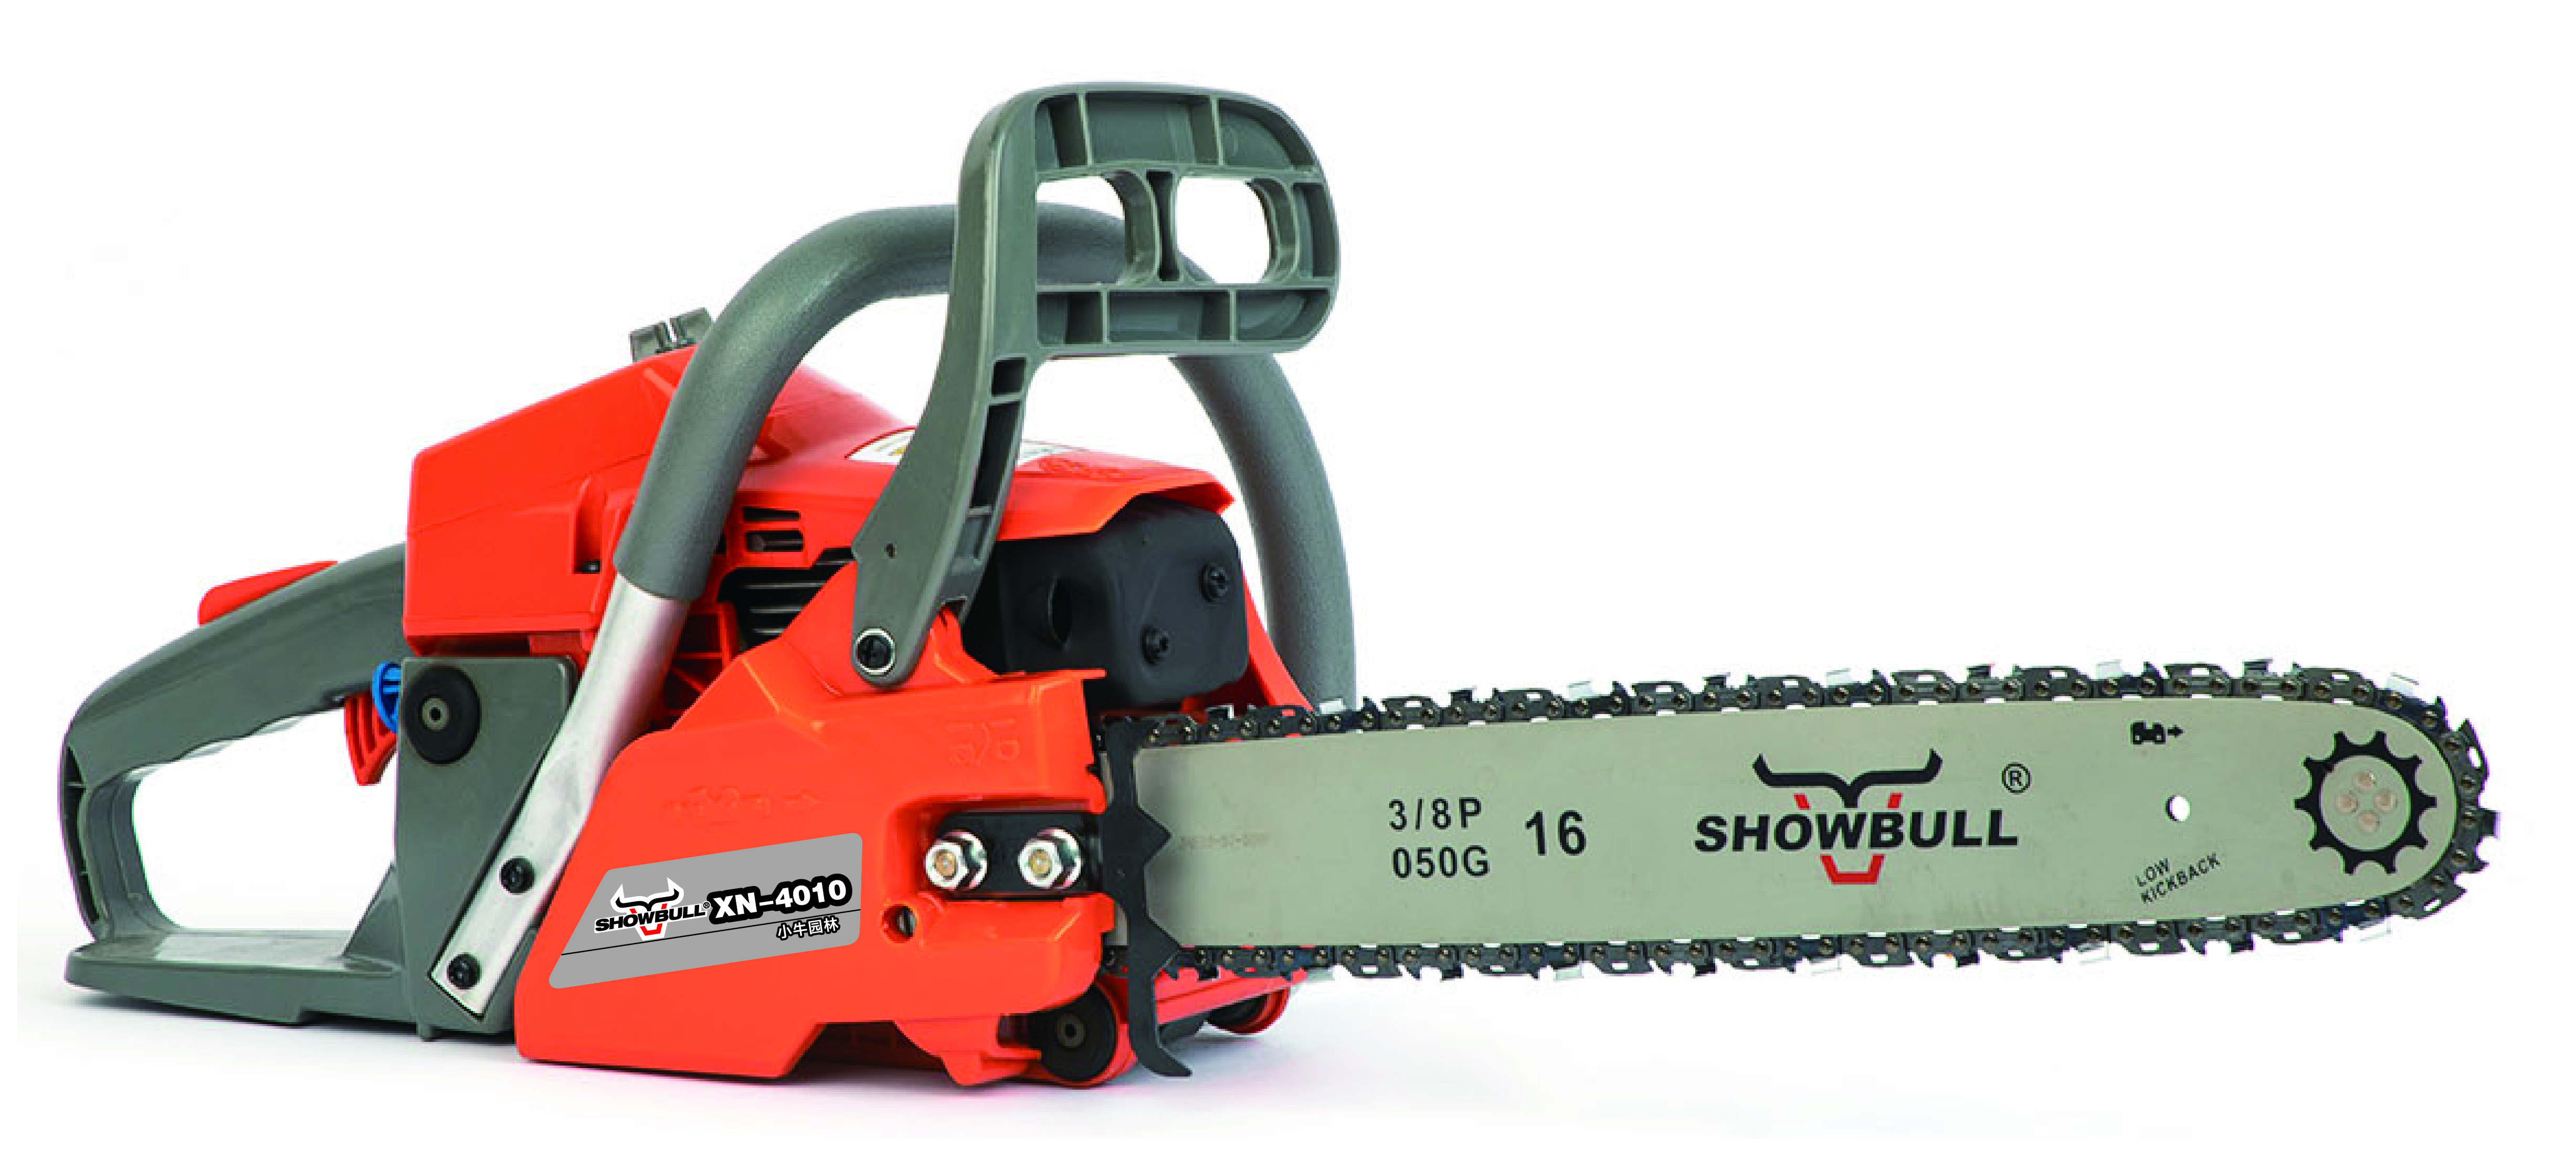 2022 New Type High Power Wood Cutting Tool Gasoline Chainsaw